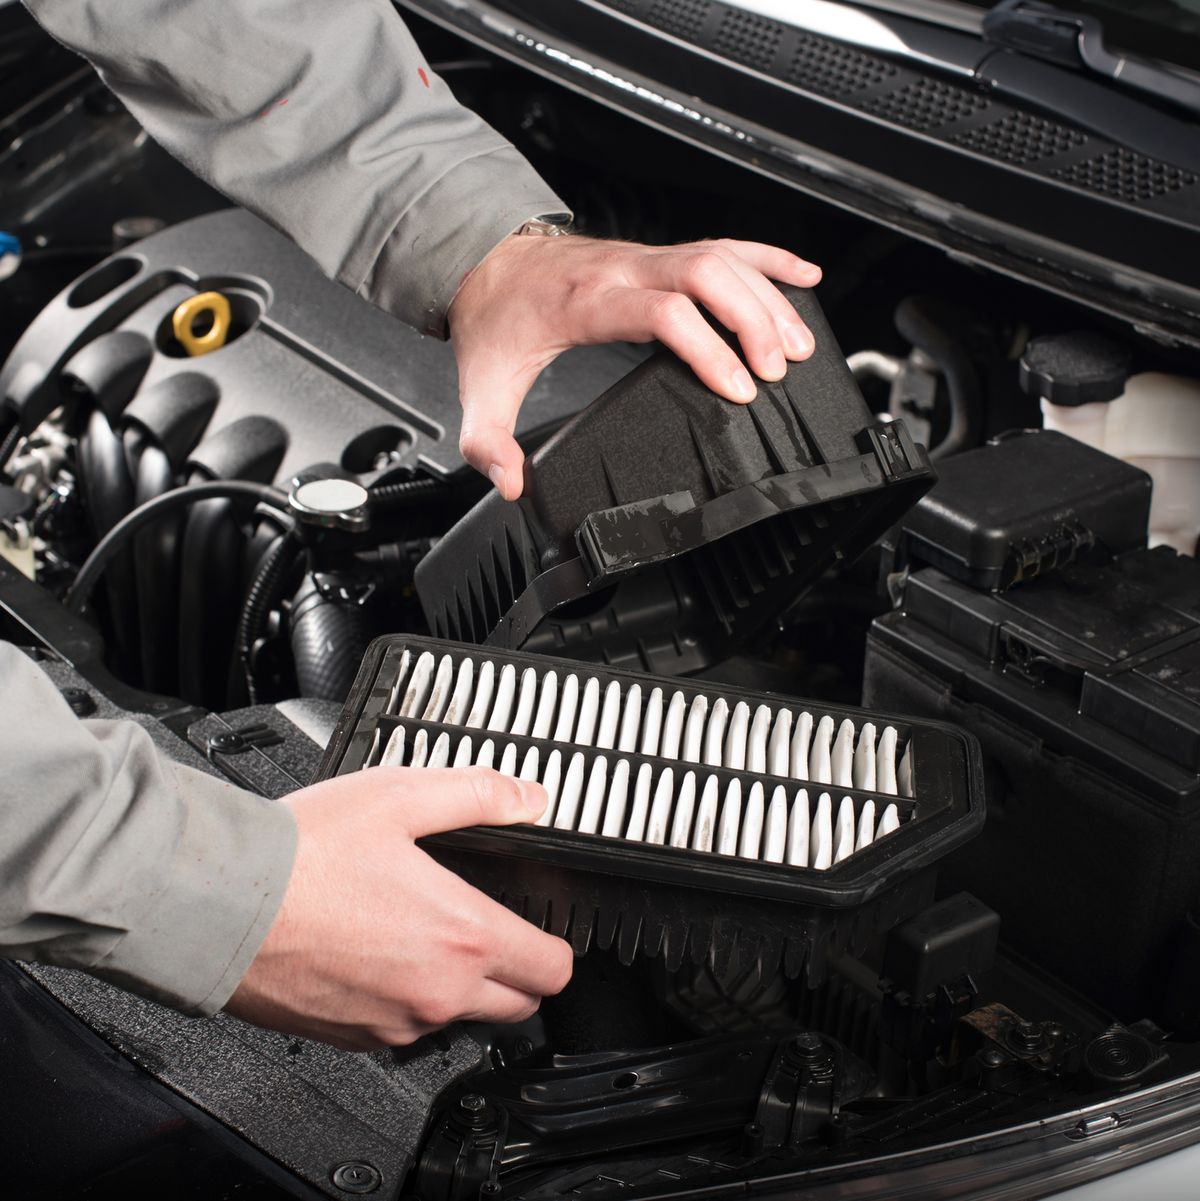 Different Types of Car Filters: Functions & More